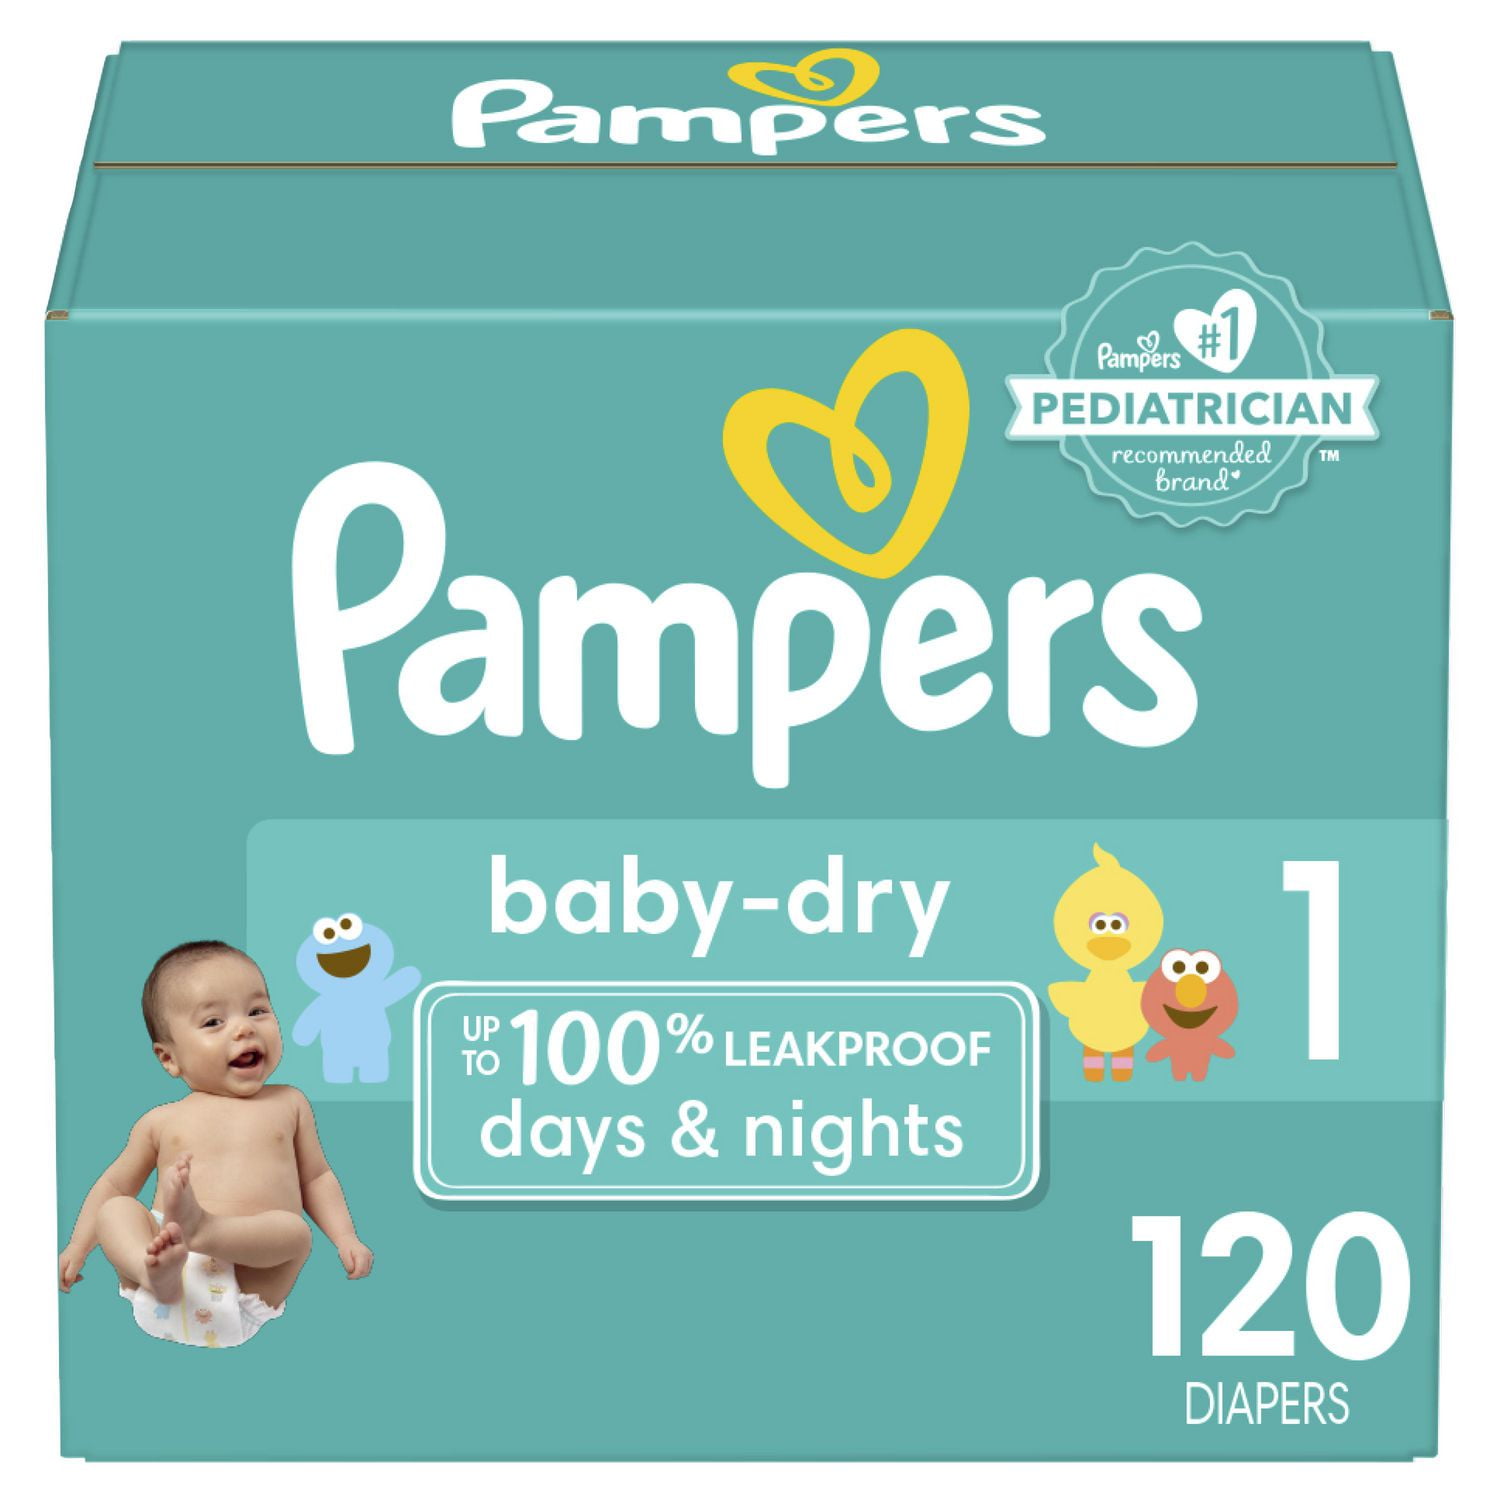 Pampers Pure Protection Diapers Newborn Size 1 82 Count